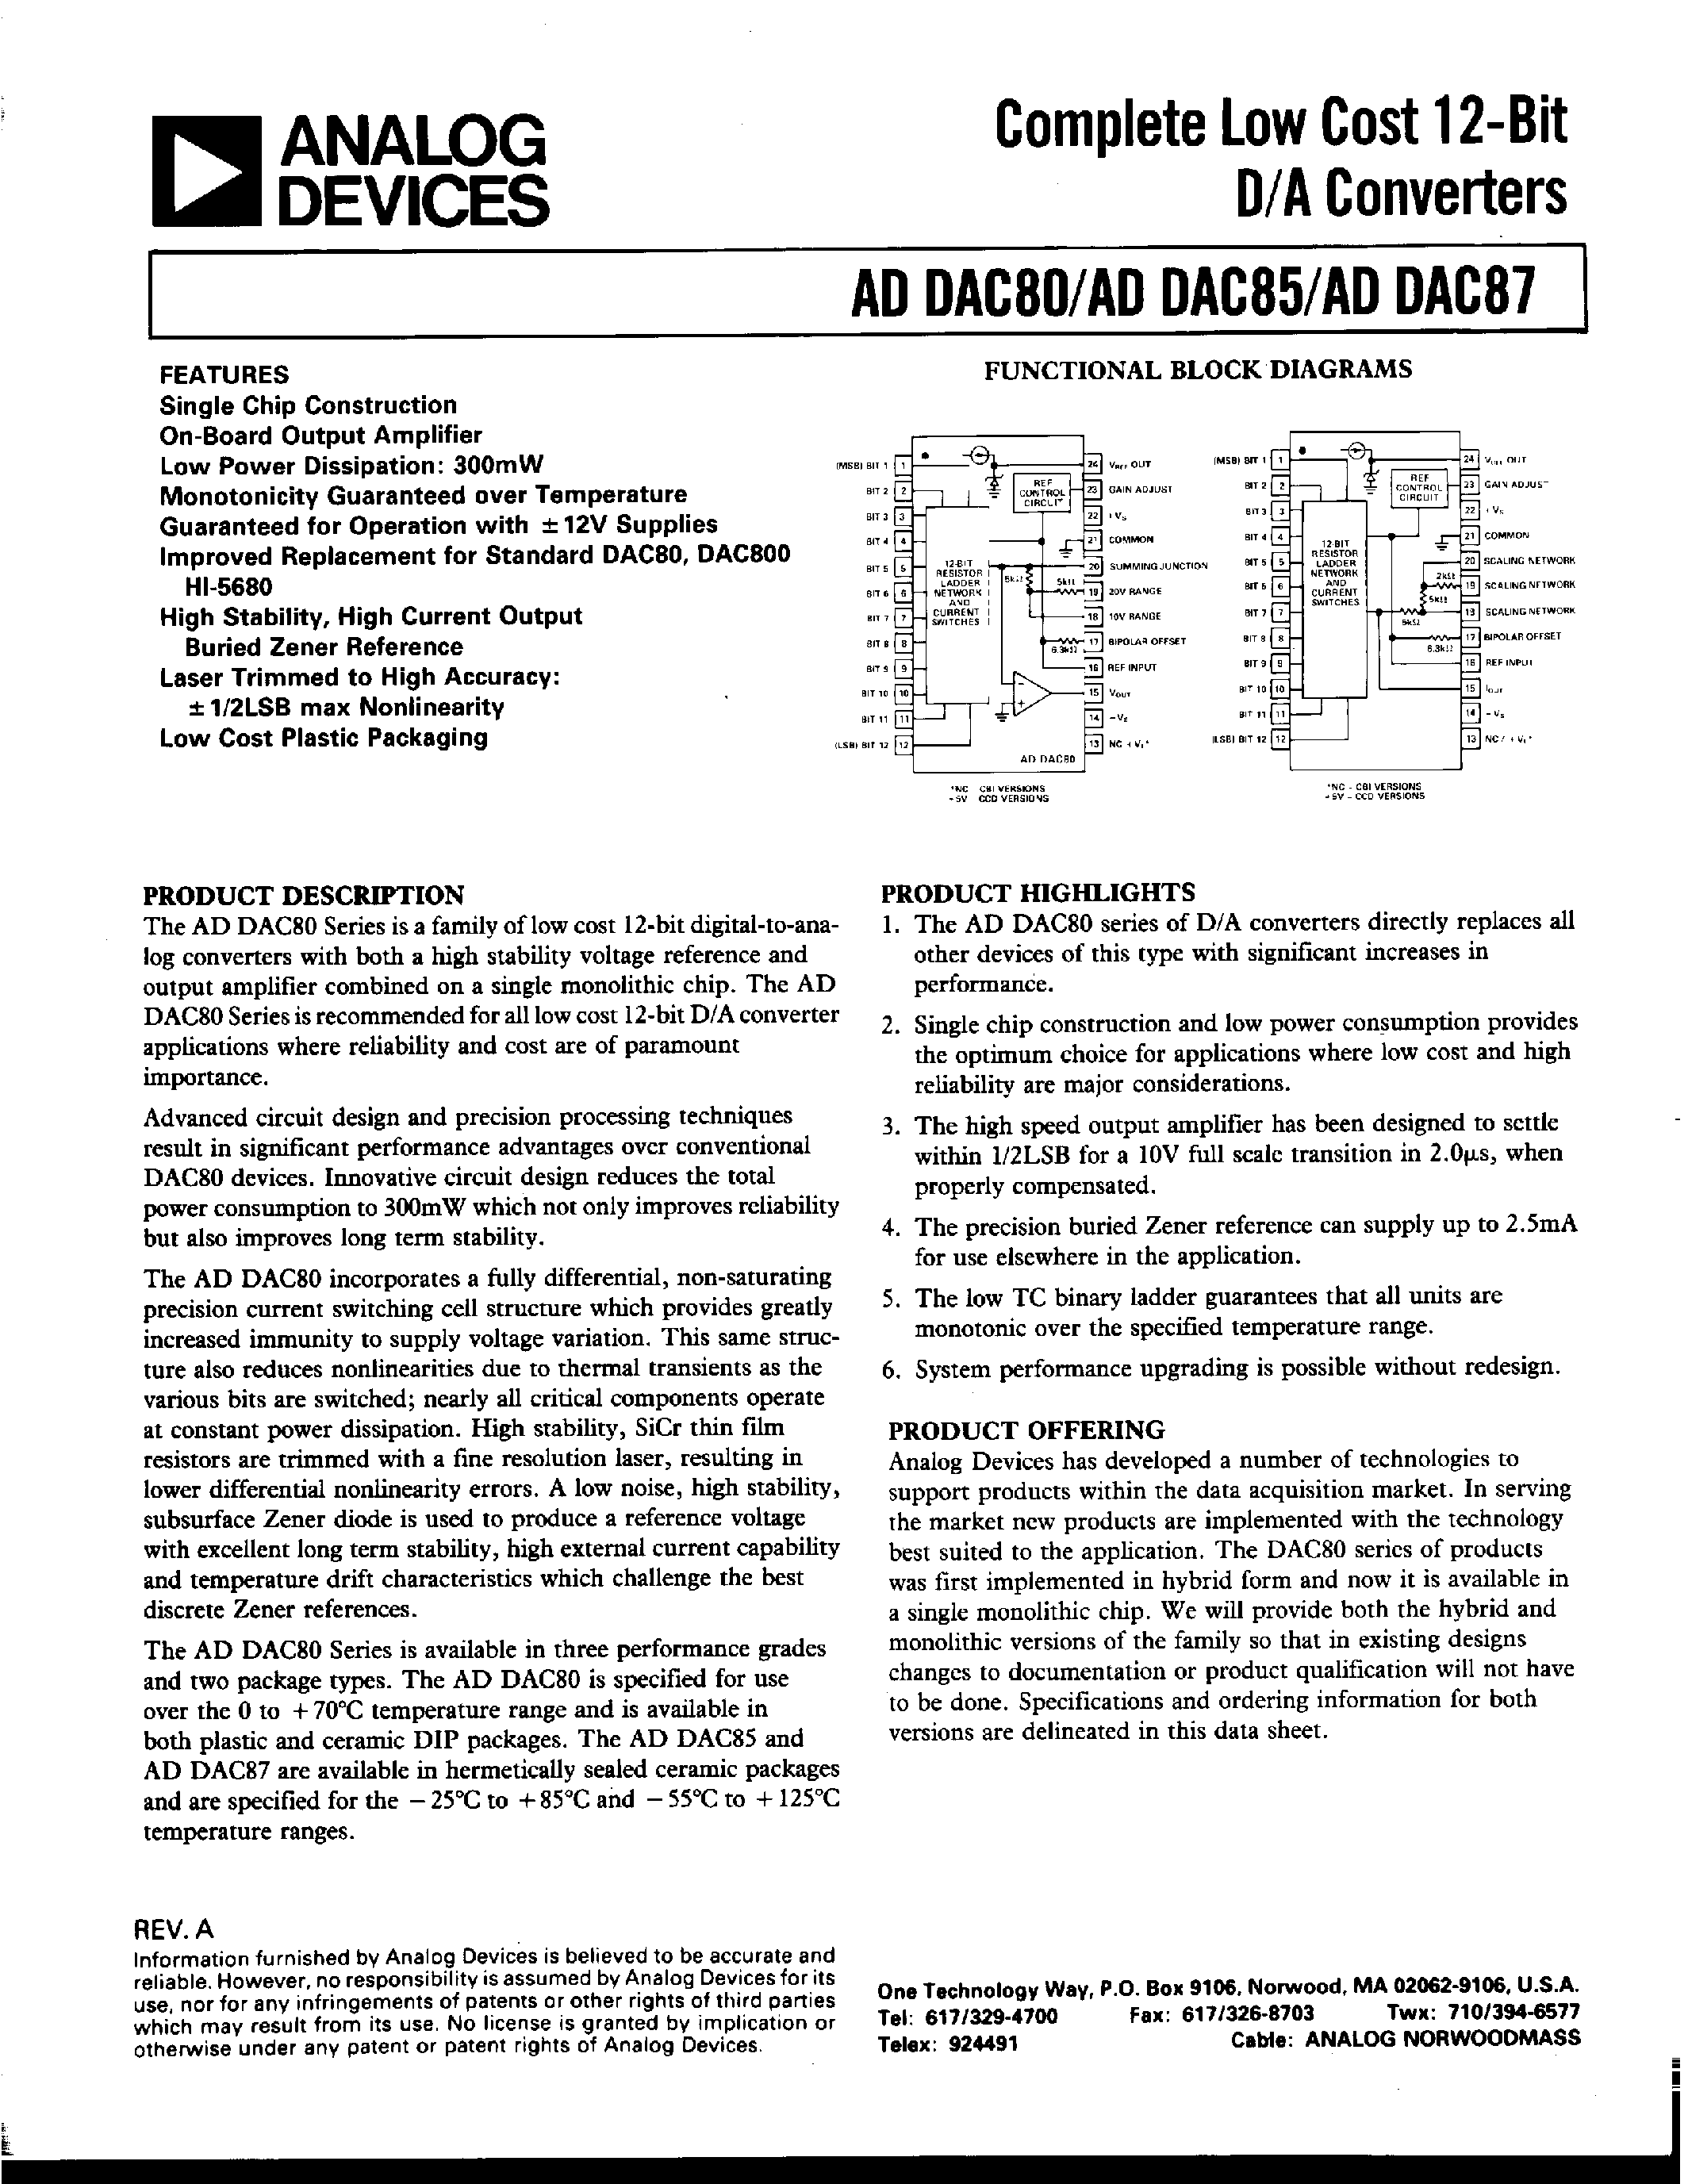 Datasheet ADDAC80-CBI-I - COMPLETE LOW COST 12-BIT D/A CONVERTERS page 1